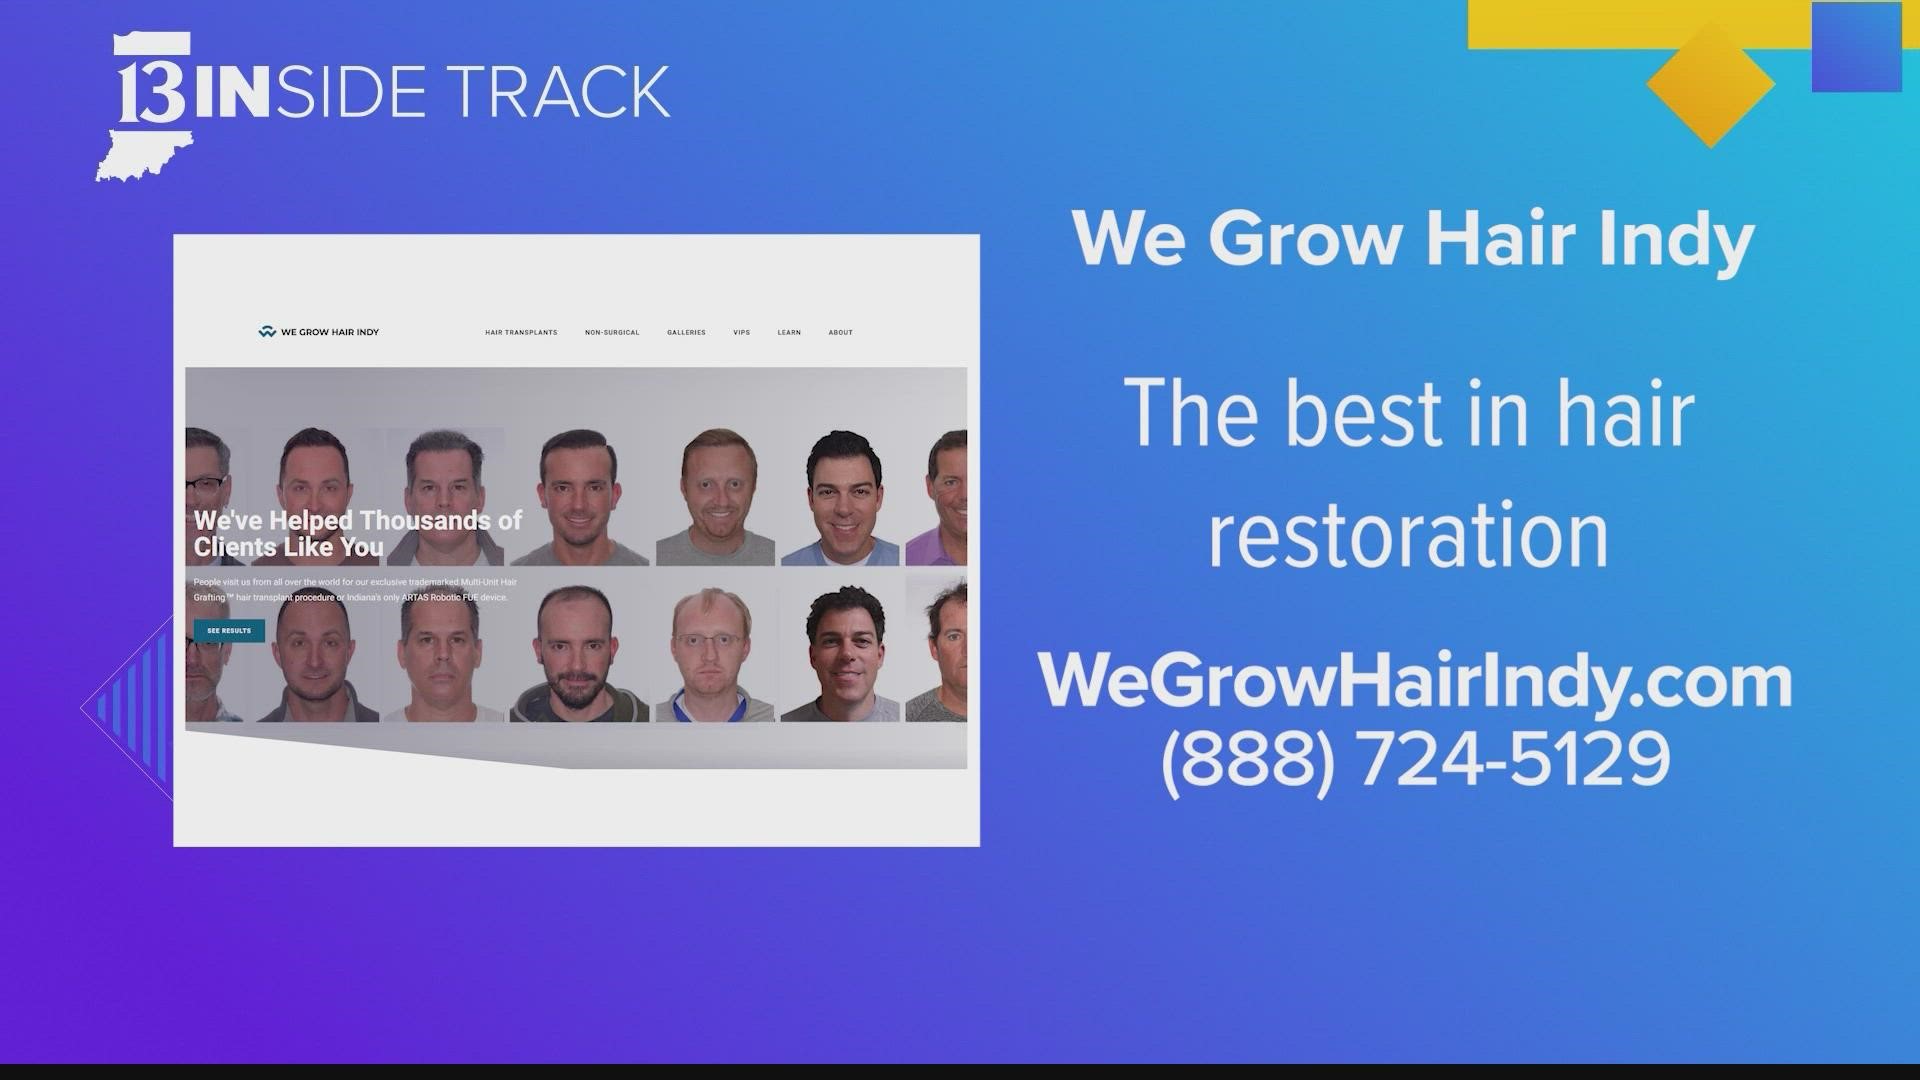 We Grow Hair Indy offers a free, private evaluation for hair restoration.